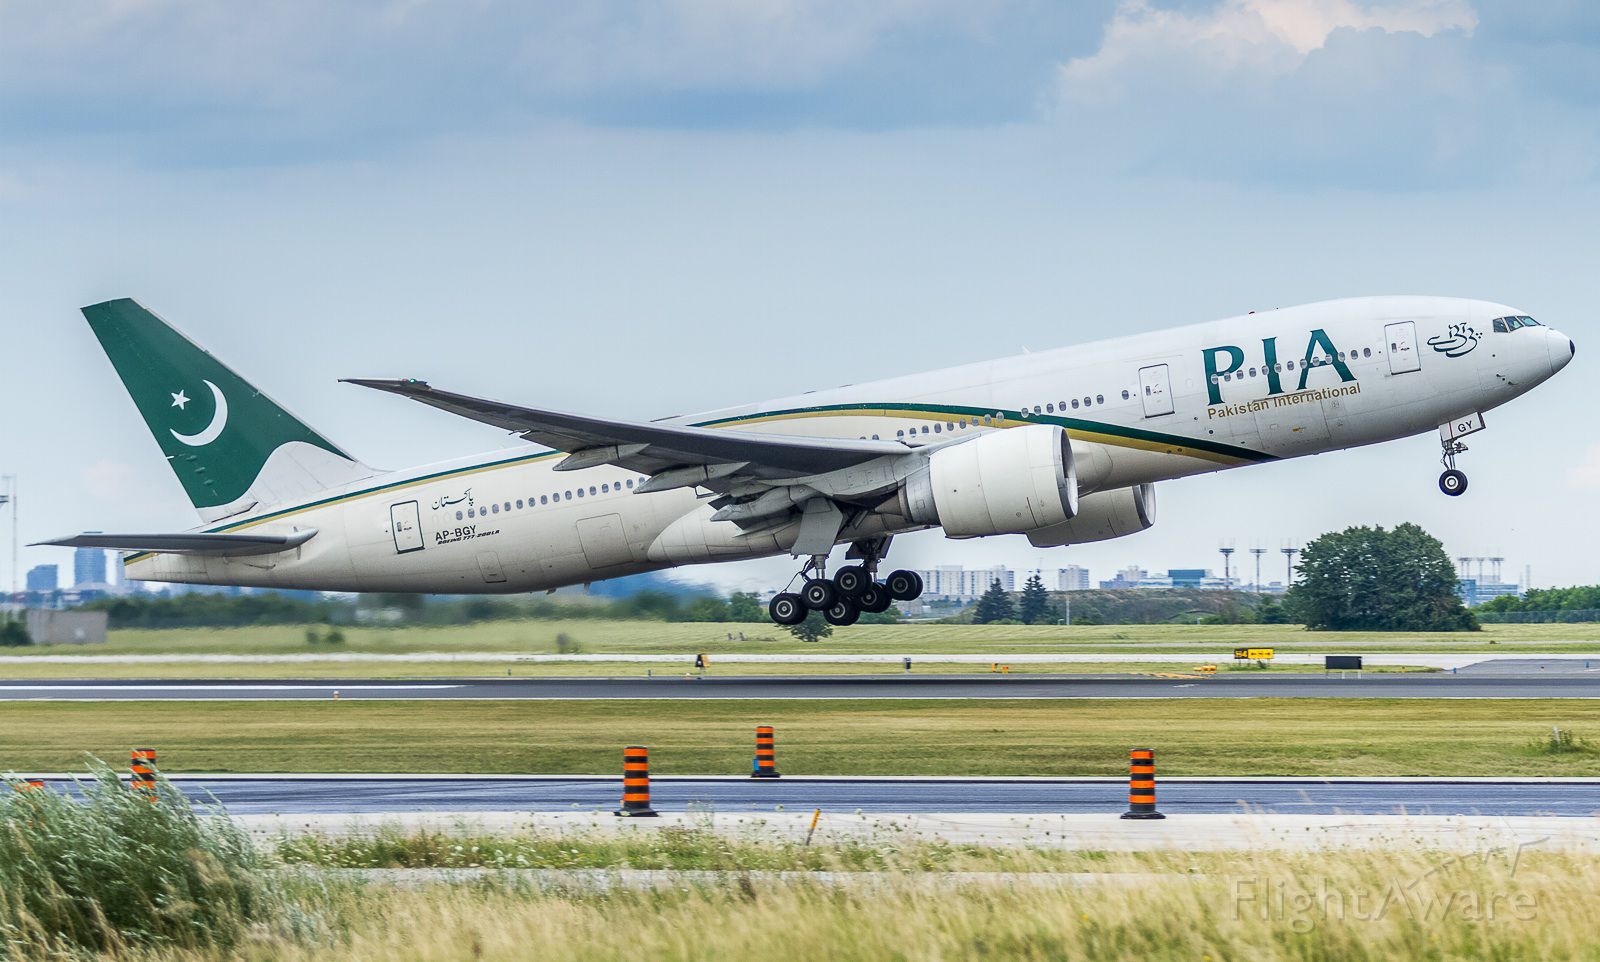 More embarrassment for PIA as two crew members slip away in Toronto